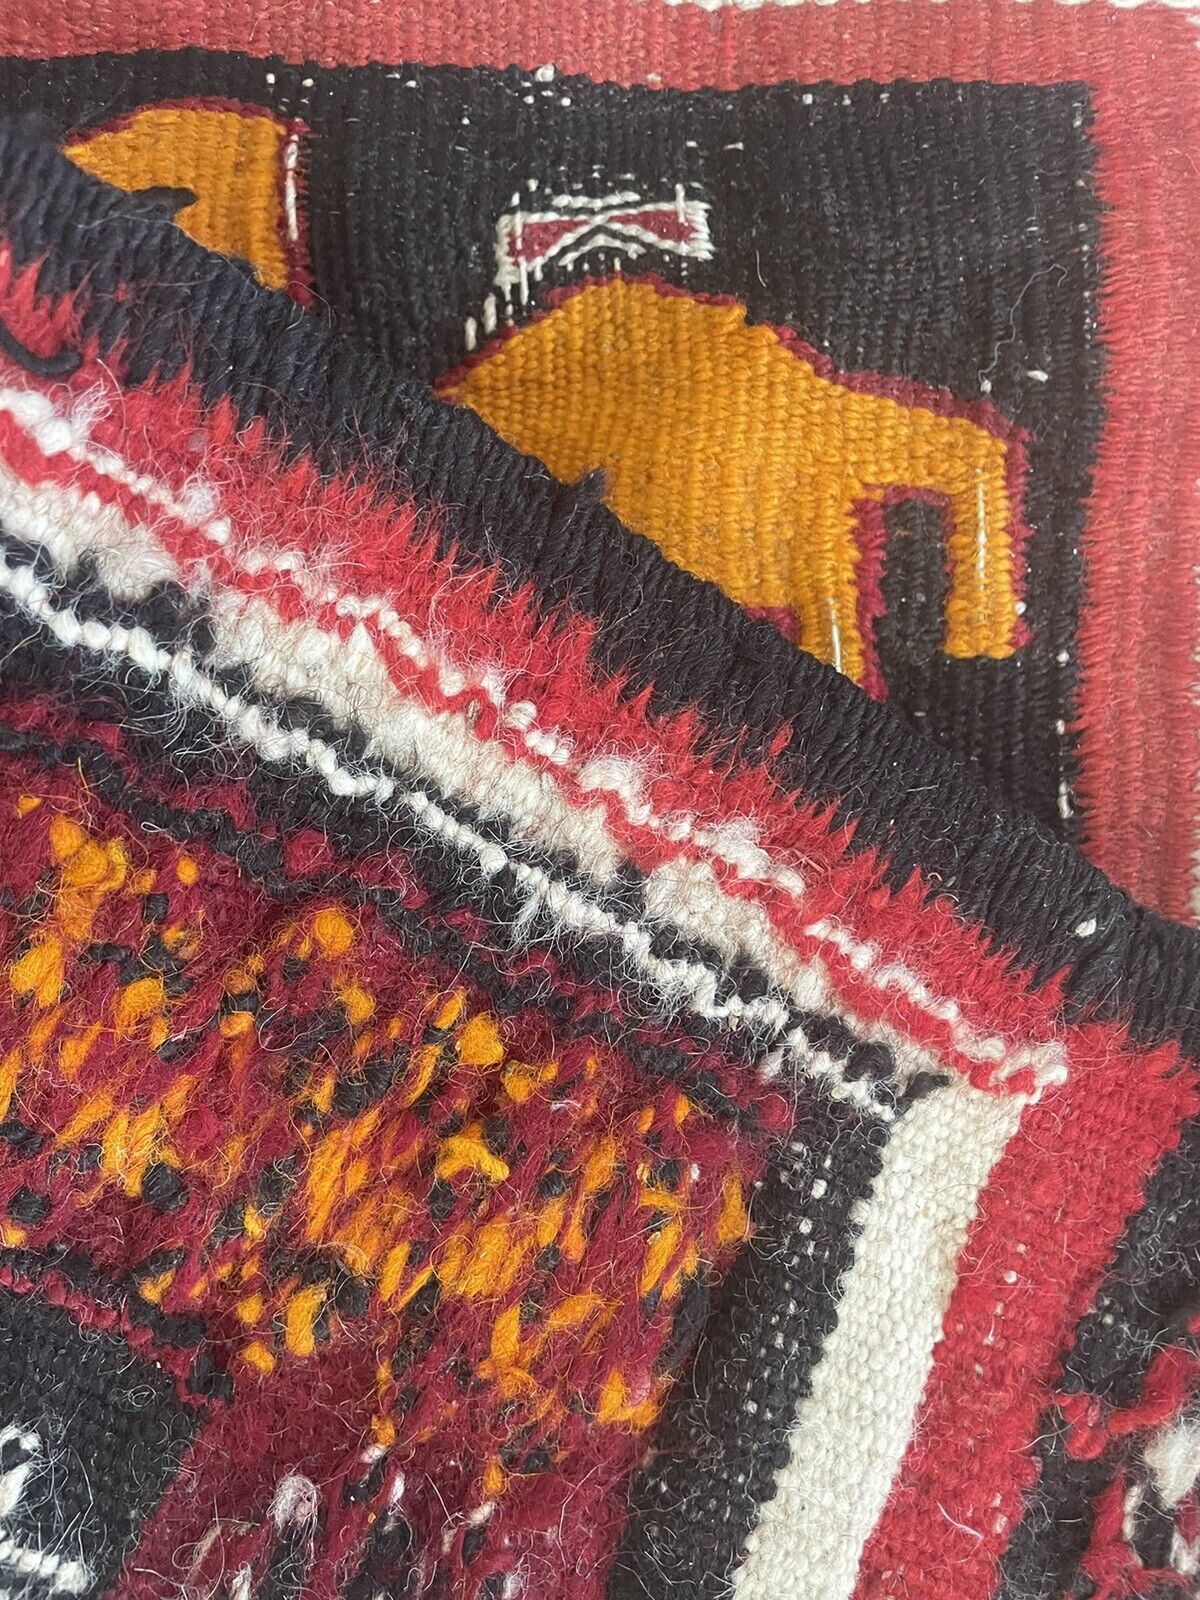 Close-up of camel motif on Handmade Antique Moroccan Berber Kilim Rug - Detailed view highlighting the central camel motif, symbolizing desert life and resilience.